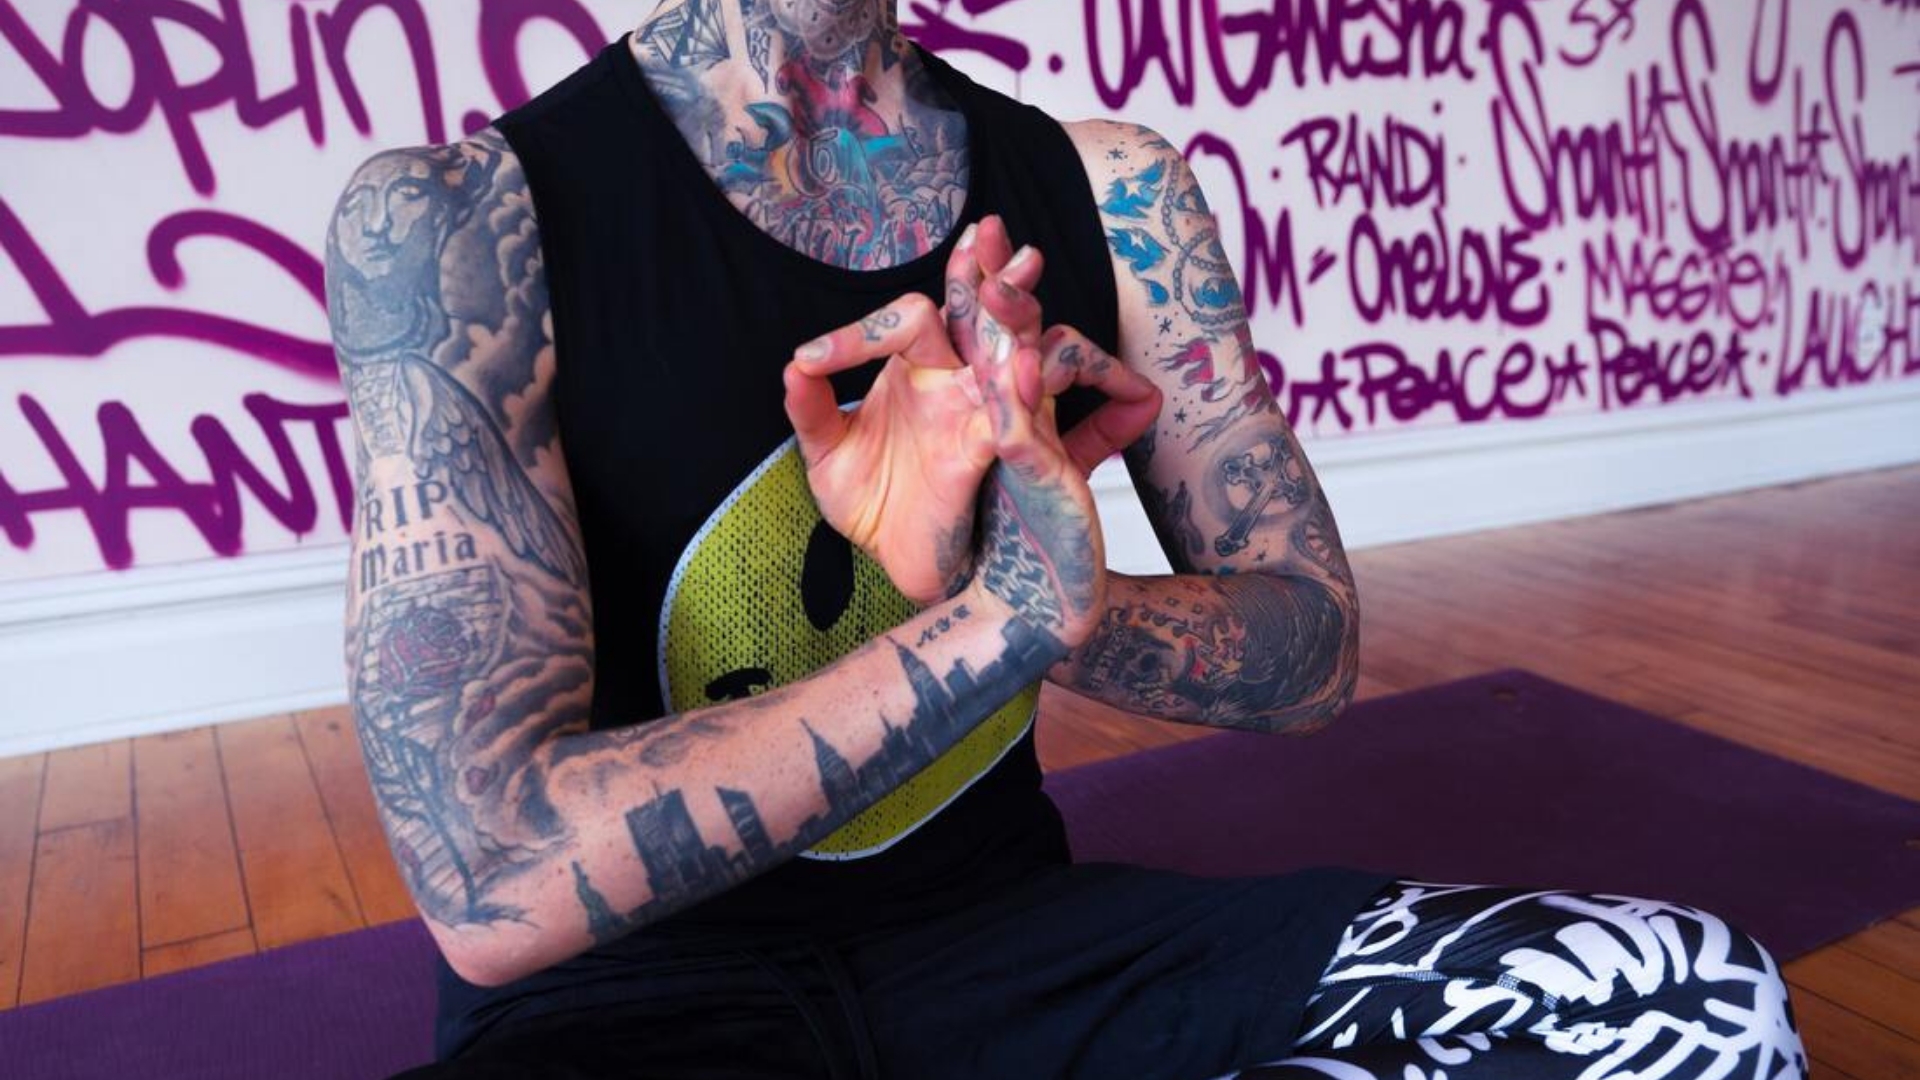 A tattooed tour guide does yoga to let go of a bad review